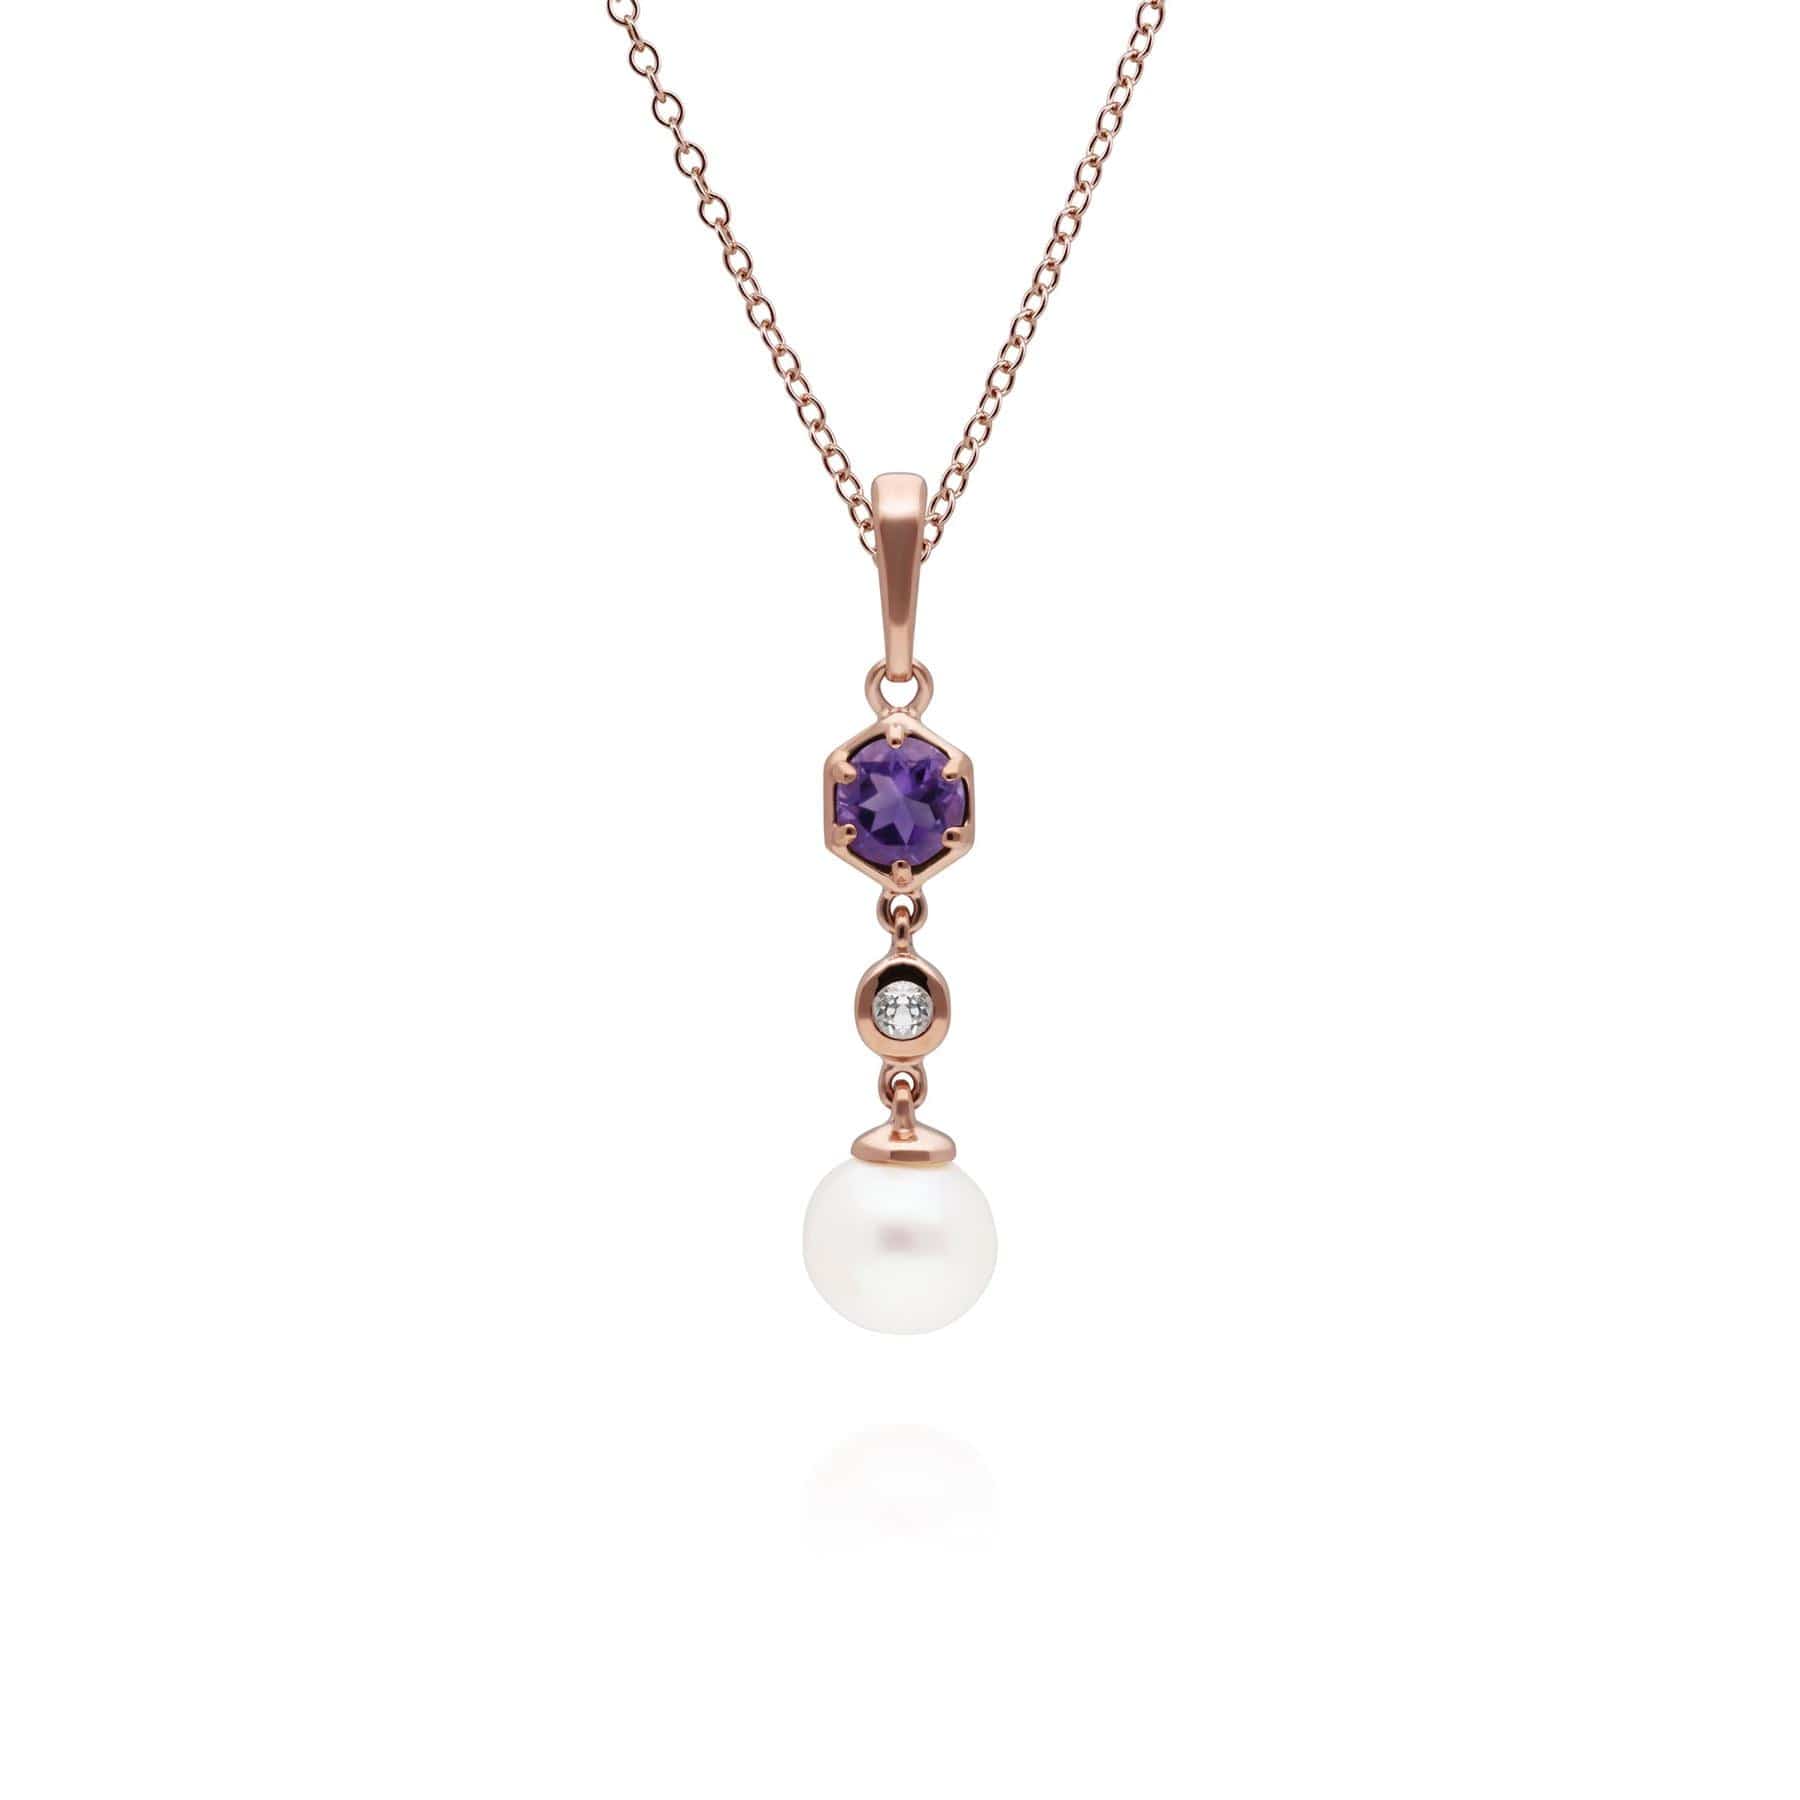 Photos - Pendant / Choker Necklace Modern Pearl, Amethyst & Topaz Drop Pendant in Rose Gold Plated Silver